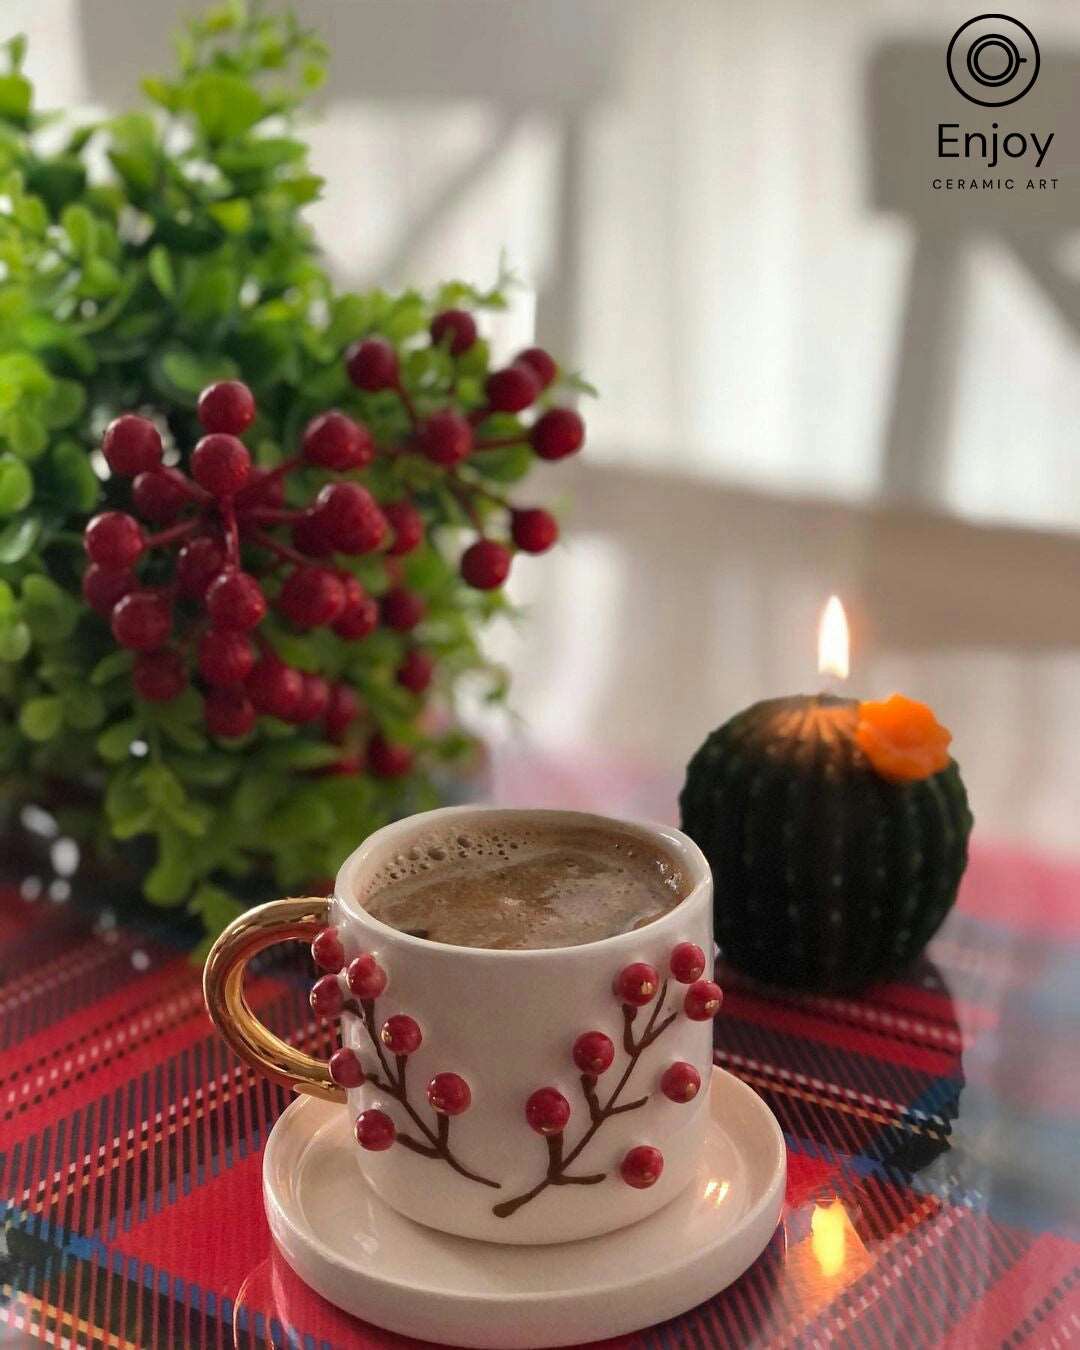 Frothy espresso in an artisanal white cup with a gold handle and winterberry motif, placed next to a green plant with red berries and a lit candle, creating a cozy ambiance.